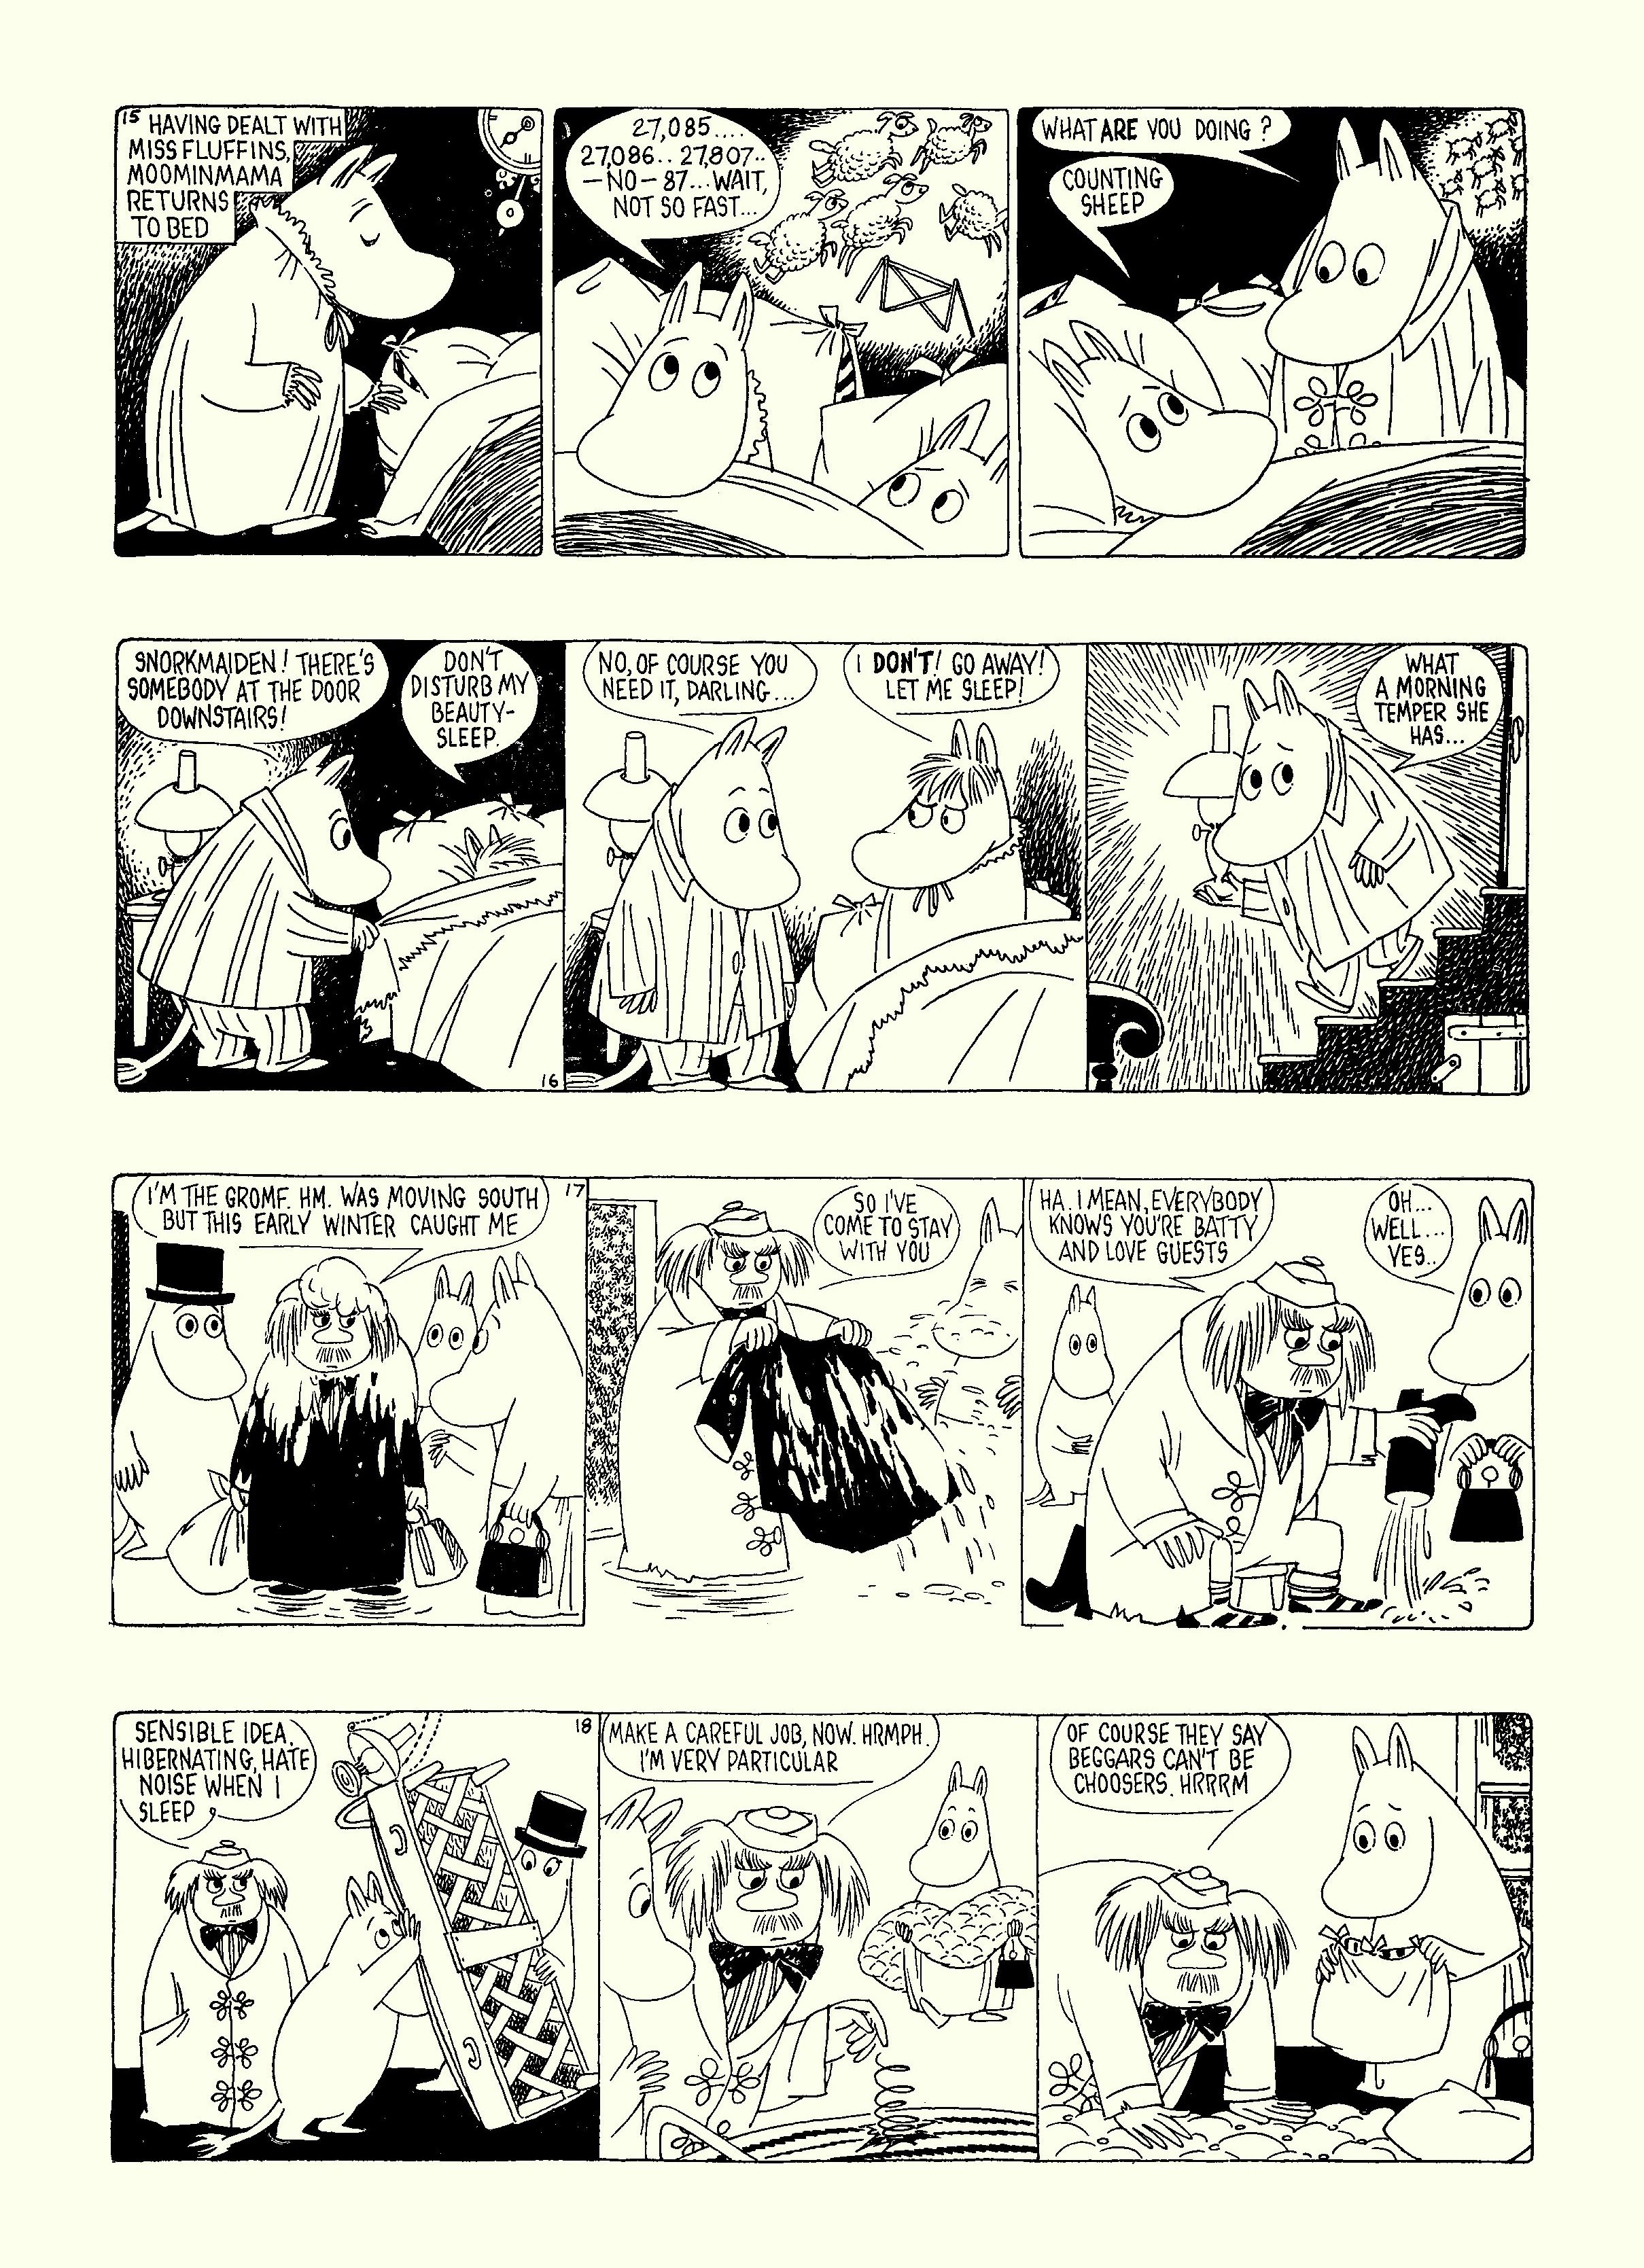 Read online Moomin: The Complete Tove Jansson Comic Strip comic -  Issue # TPB 5 - 10